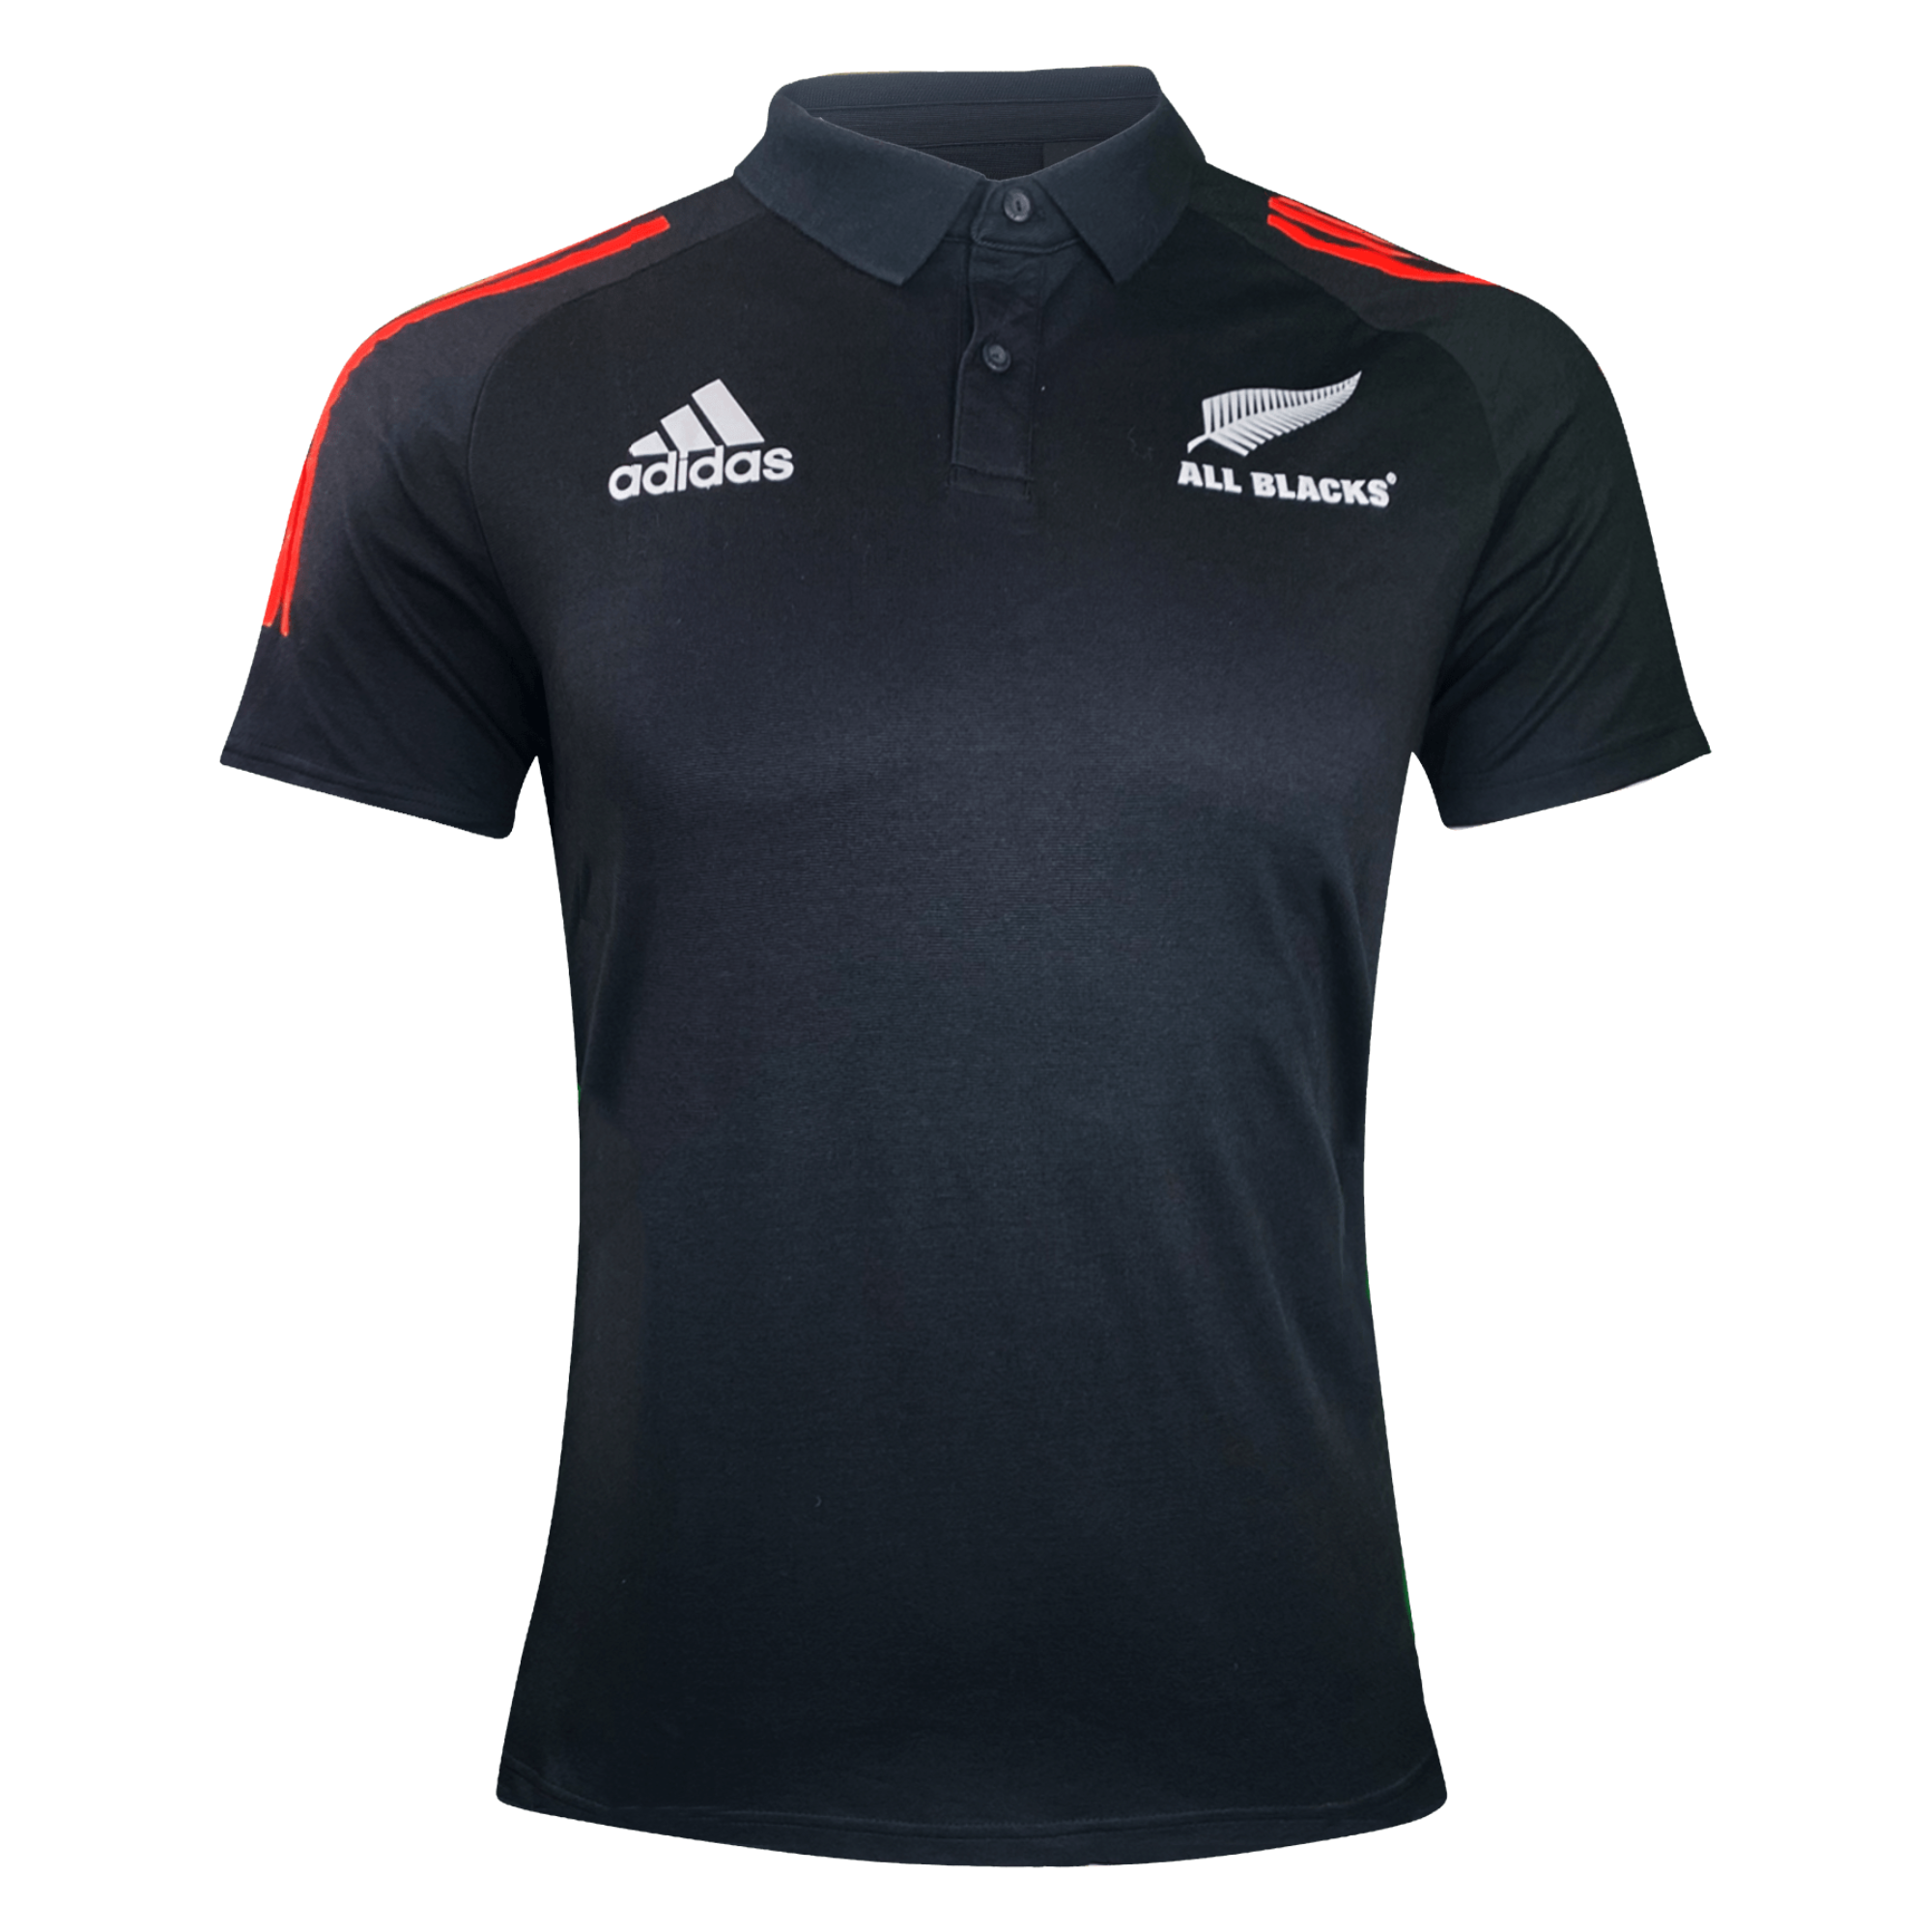 armario podar querido All Blacks Rugby Polo 2021 by adidas | New Zealand Rugby Cotton/Poly Shirt  - Black - World Rugby Shop